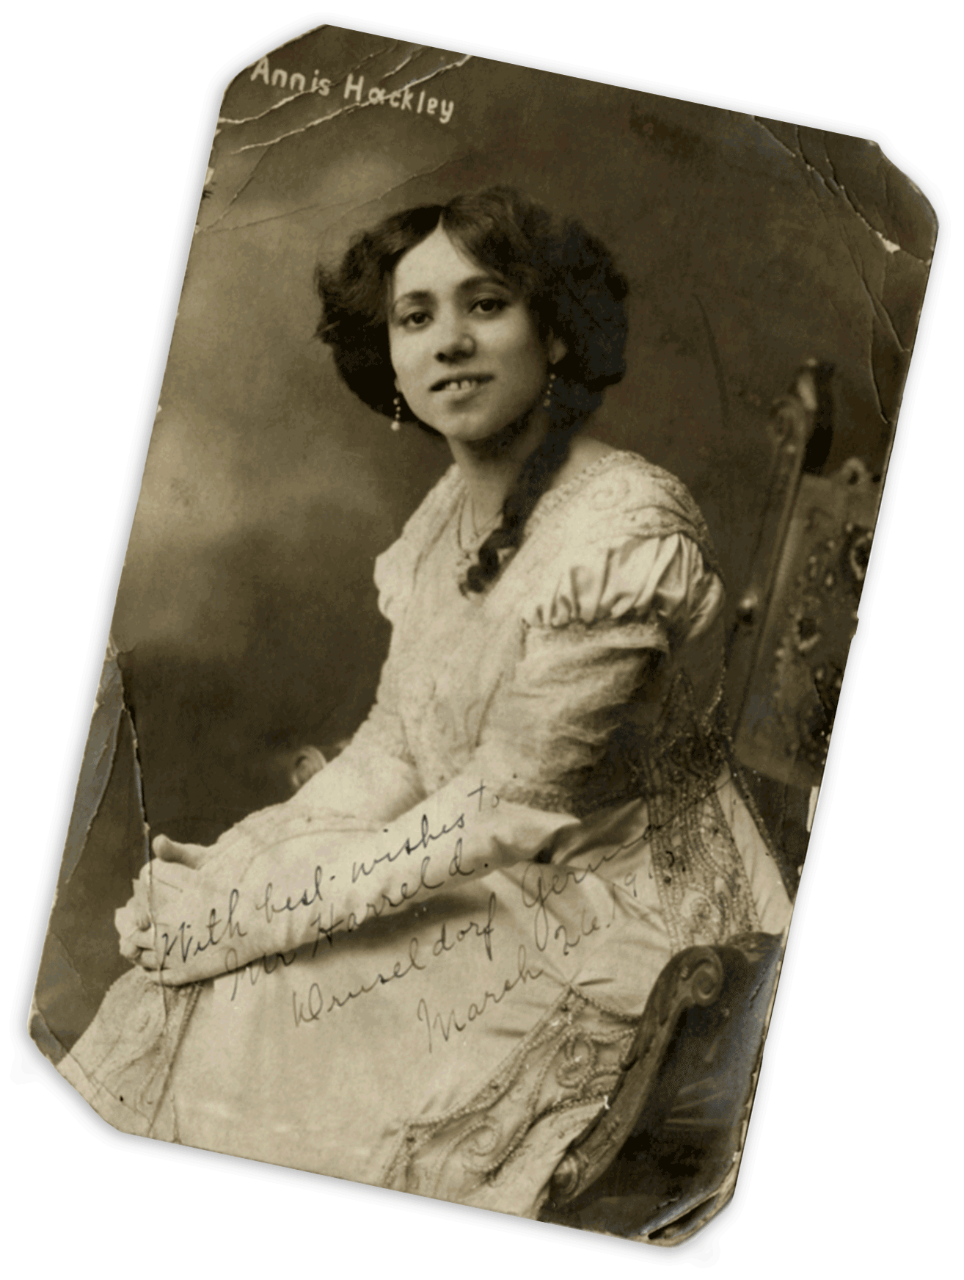 A sepia-toned photograph of opera singer Annis Hackley.